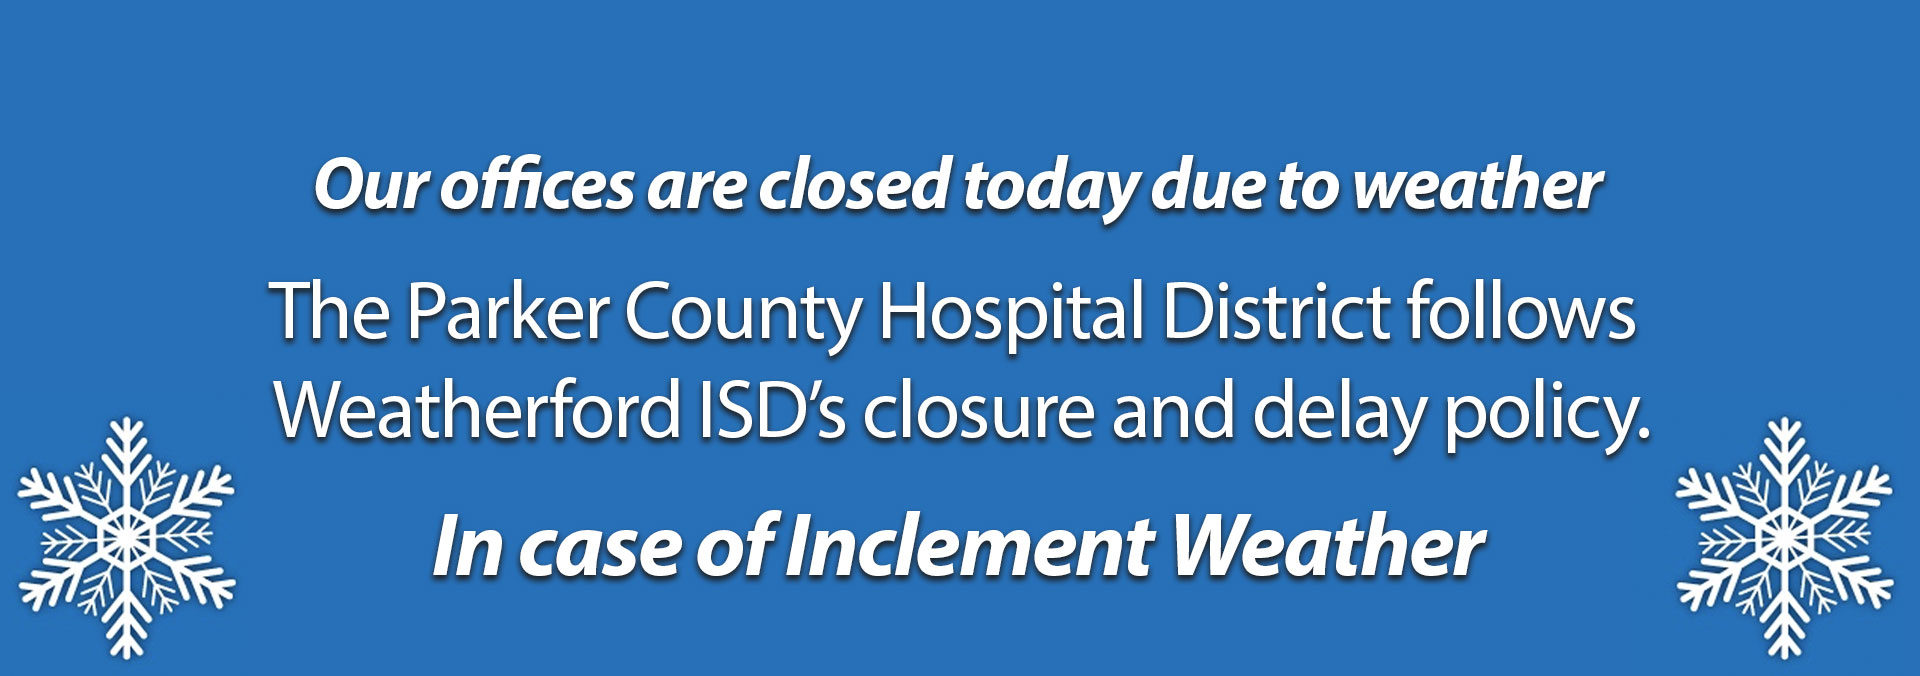 Our offices are closed today due to weather. 

The Parker County Hospital District follows Weatherford ISD’s closure and delay policy.